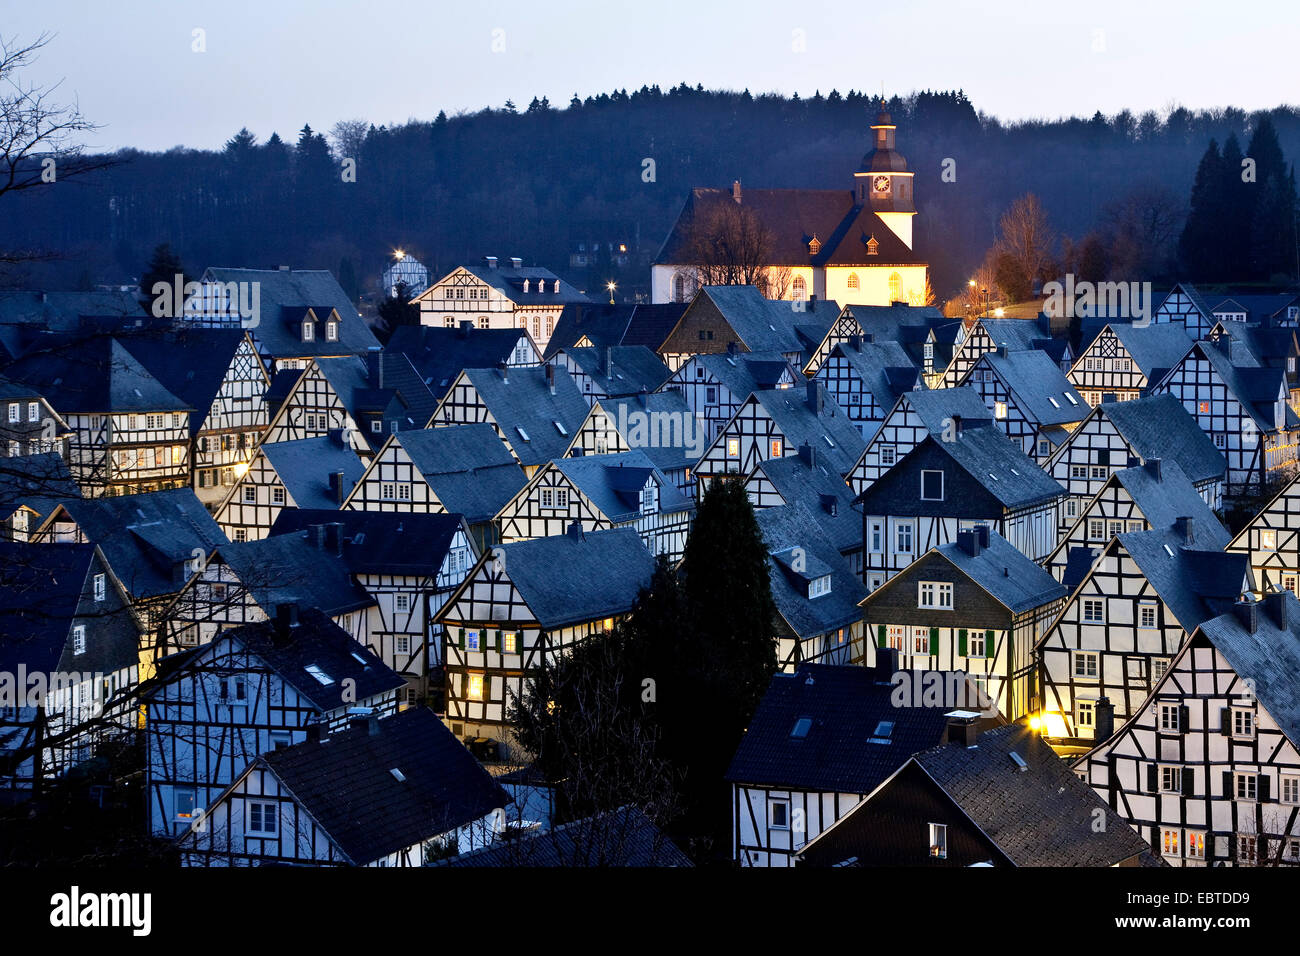 old town with historical timber-framed houses in evening light, Germany, North Rhine-Westphalia, Freudenberg Stock Photo